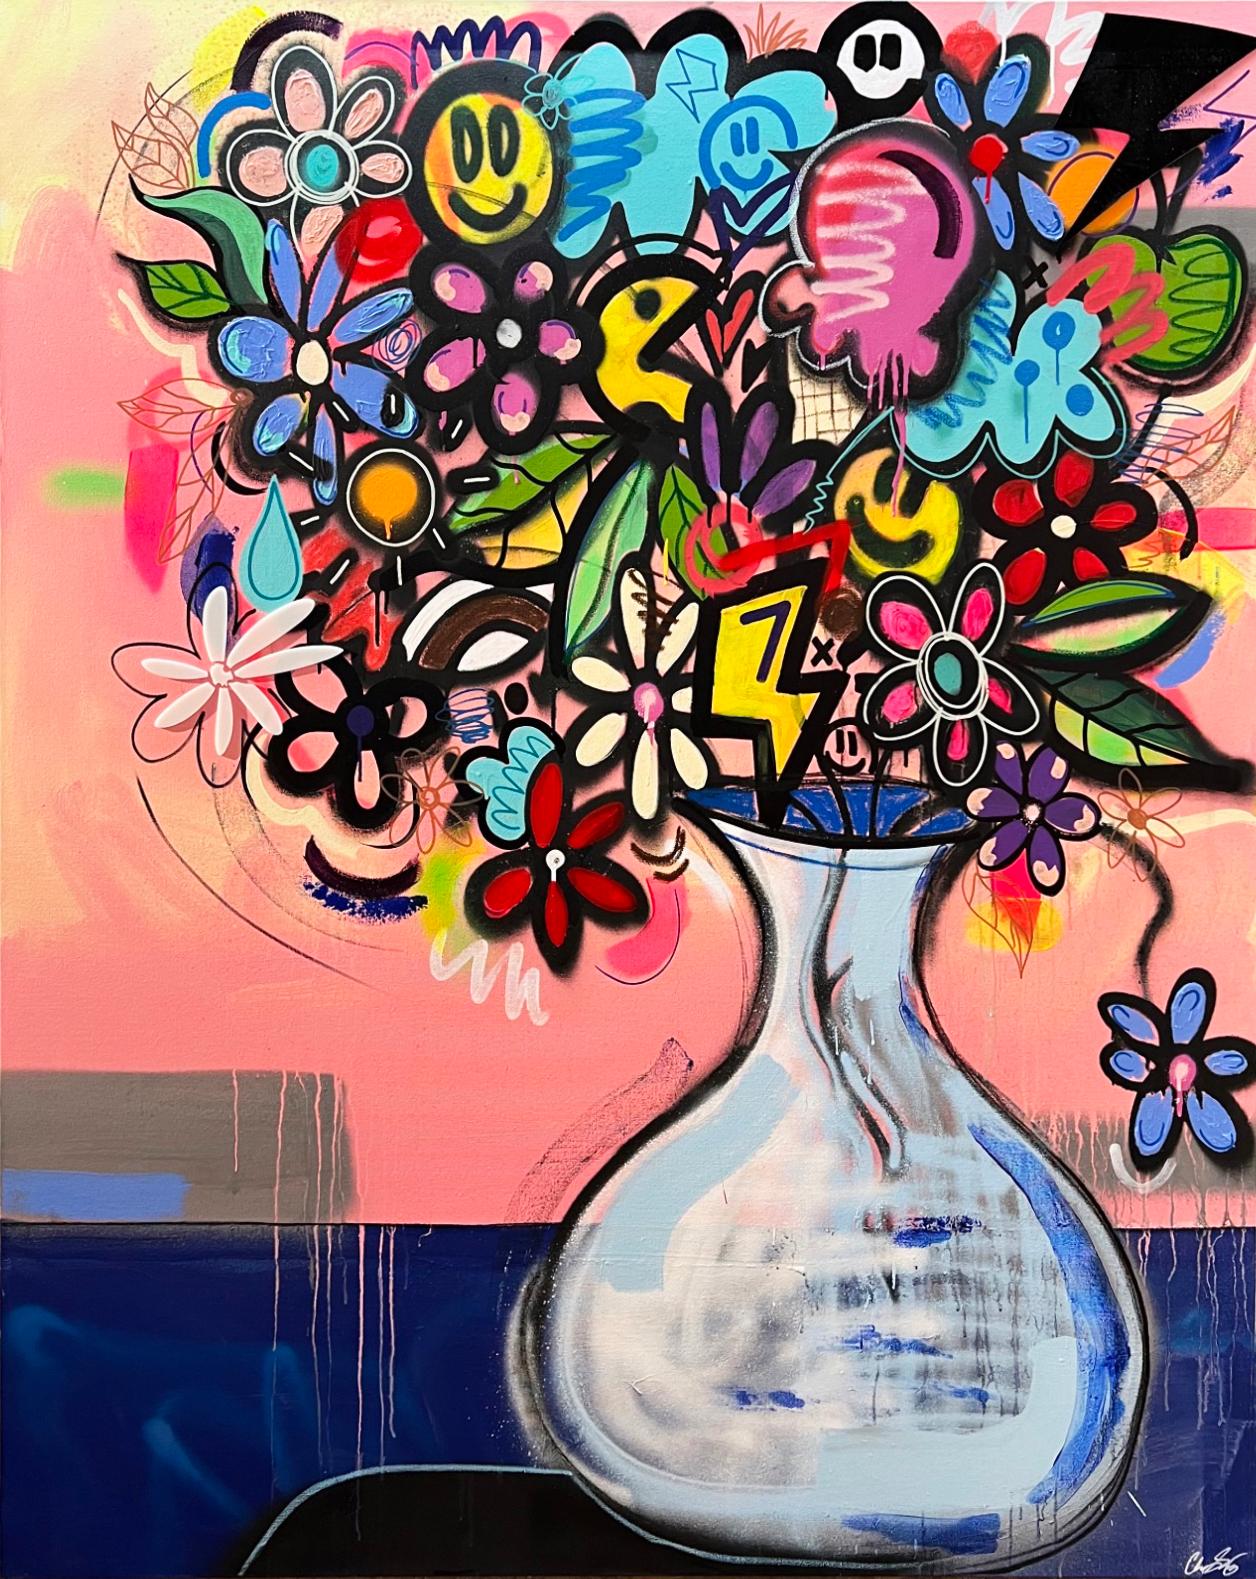 Chris Solcz Abstract Painting - Bouquet No. 1, large graffiti floral still life, acrylic on canvas, 2022